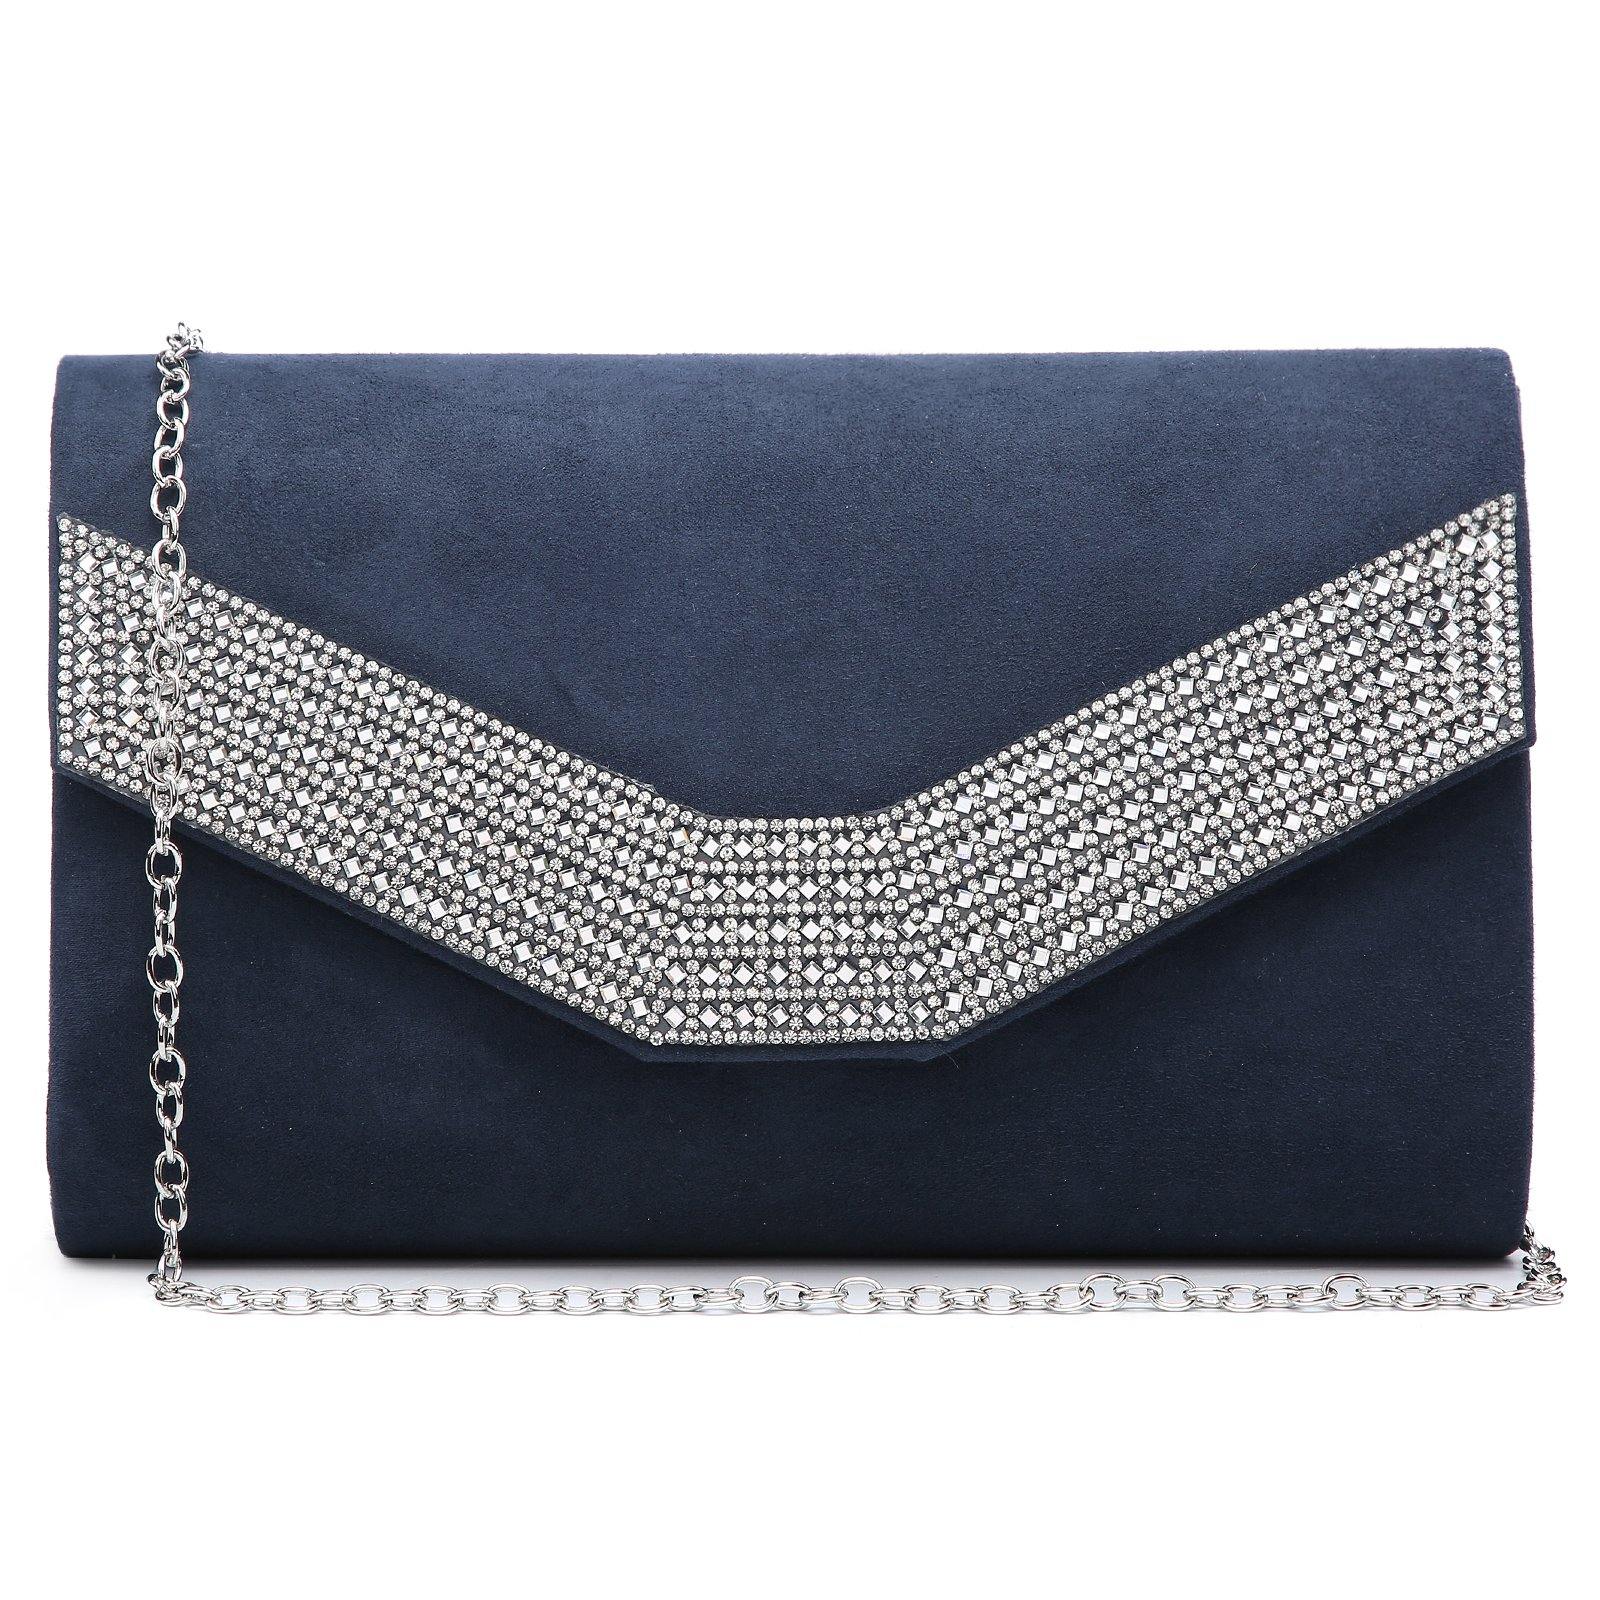 Affordable and Stylish Clutches and Evening Bags to Shop for Winter 2015